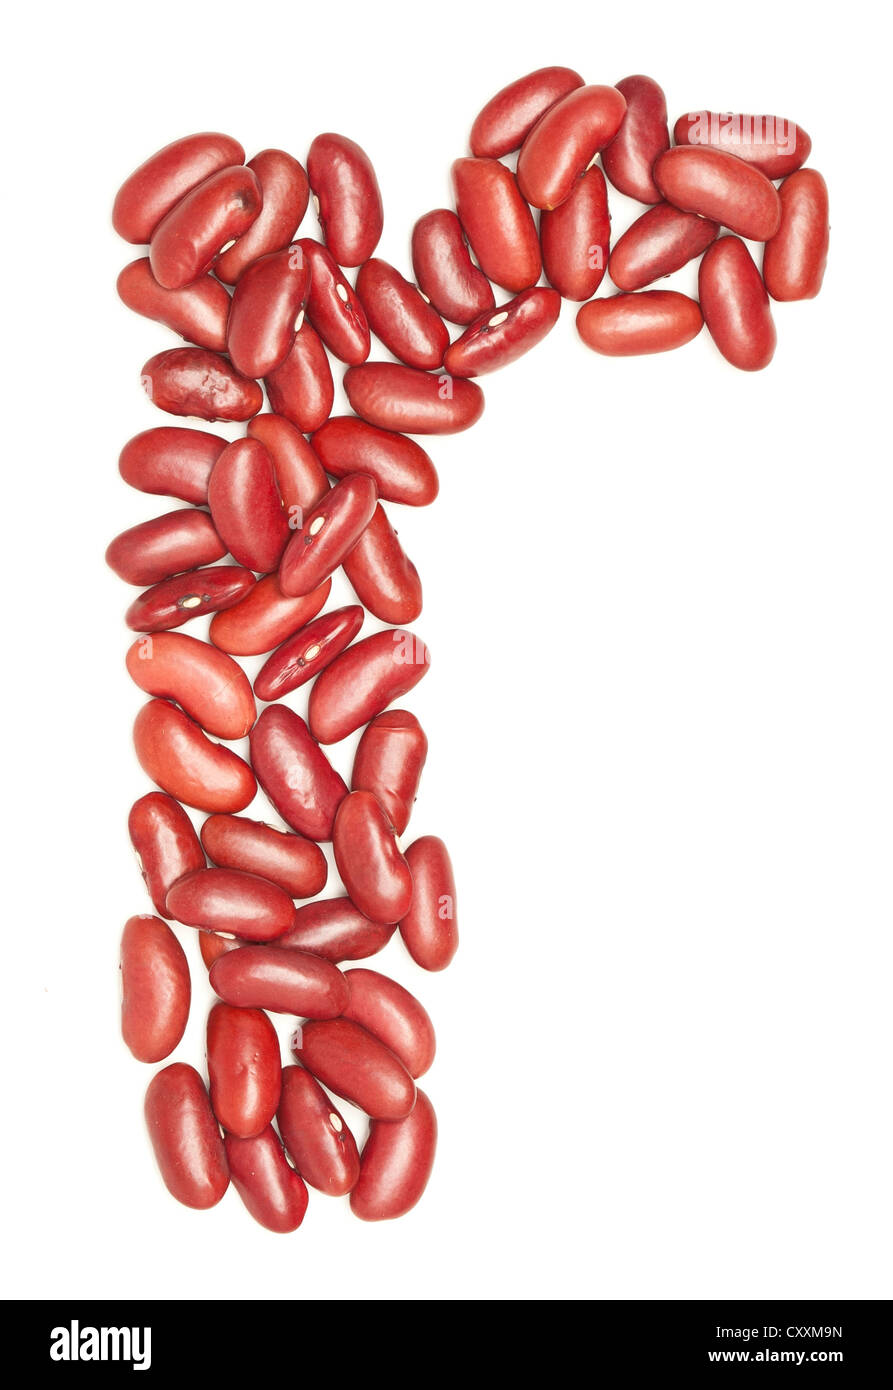 r, Alphabet from red beans. on white. Stock Photo